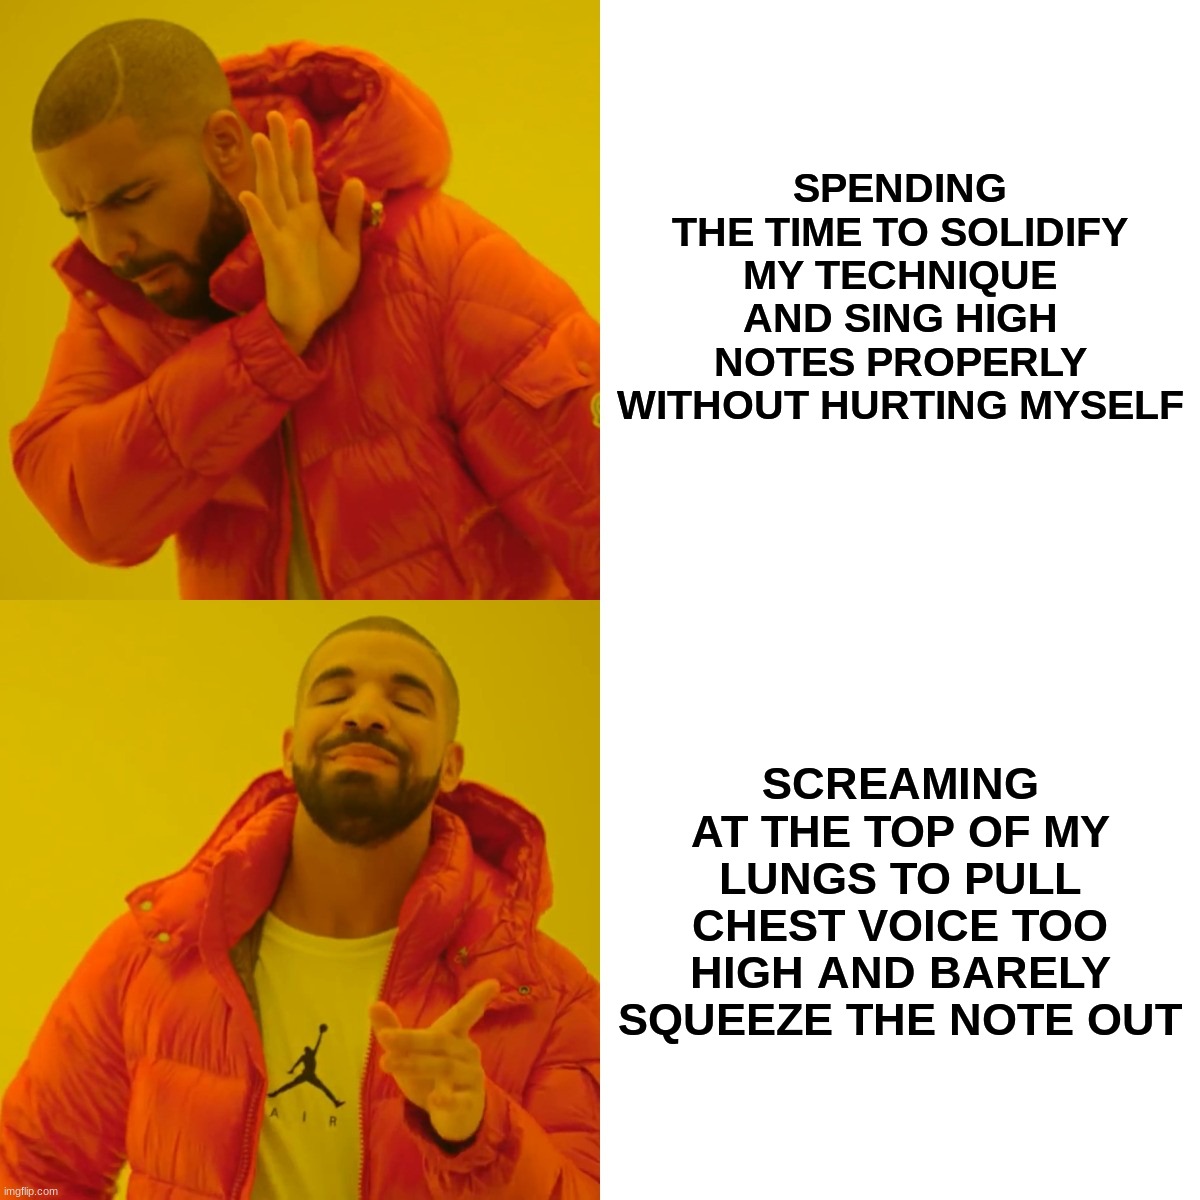 High notes Drake meme | SPENDING THE TIME TO SOLIDIFY MY TECHNIQUE AND SING HIGH NOTES PROPERLY WITHOUT HURTING MYSELF; SCREAMING AT THE TOP OF MY LUNGS TO PULL CHEST VOICE TOO HIGH AND BARELY SQUEEZE THE NOTE OUT | image tagged in memes,drake hotline bling | made w/ Imgflip meme maker